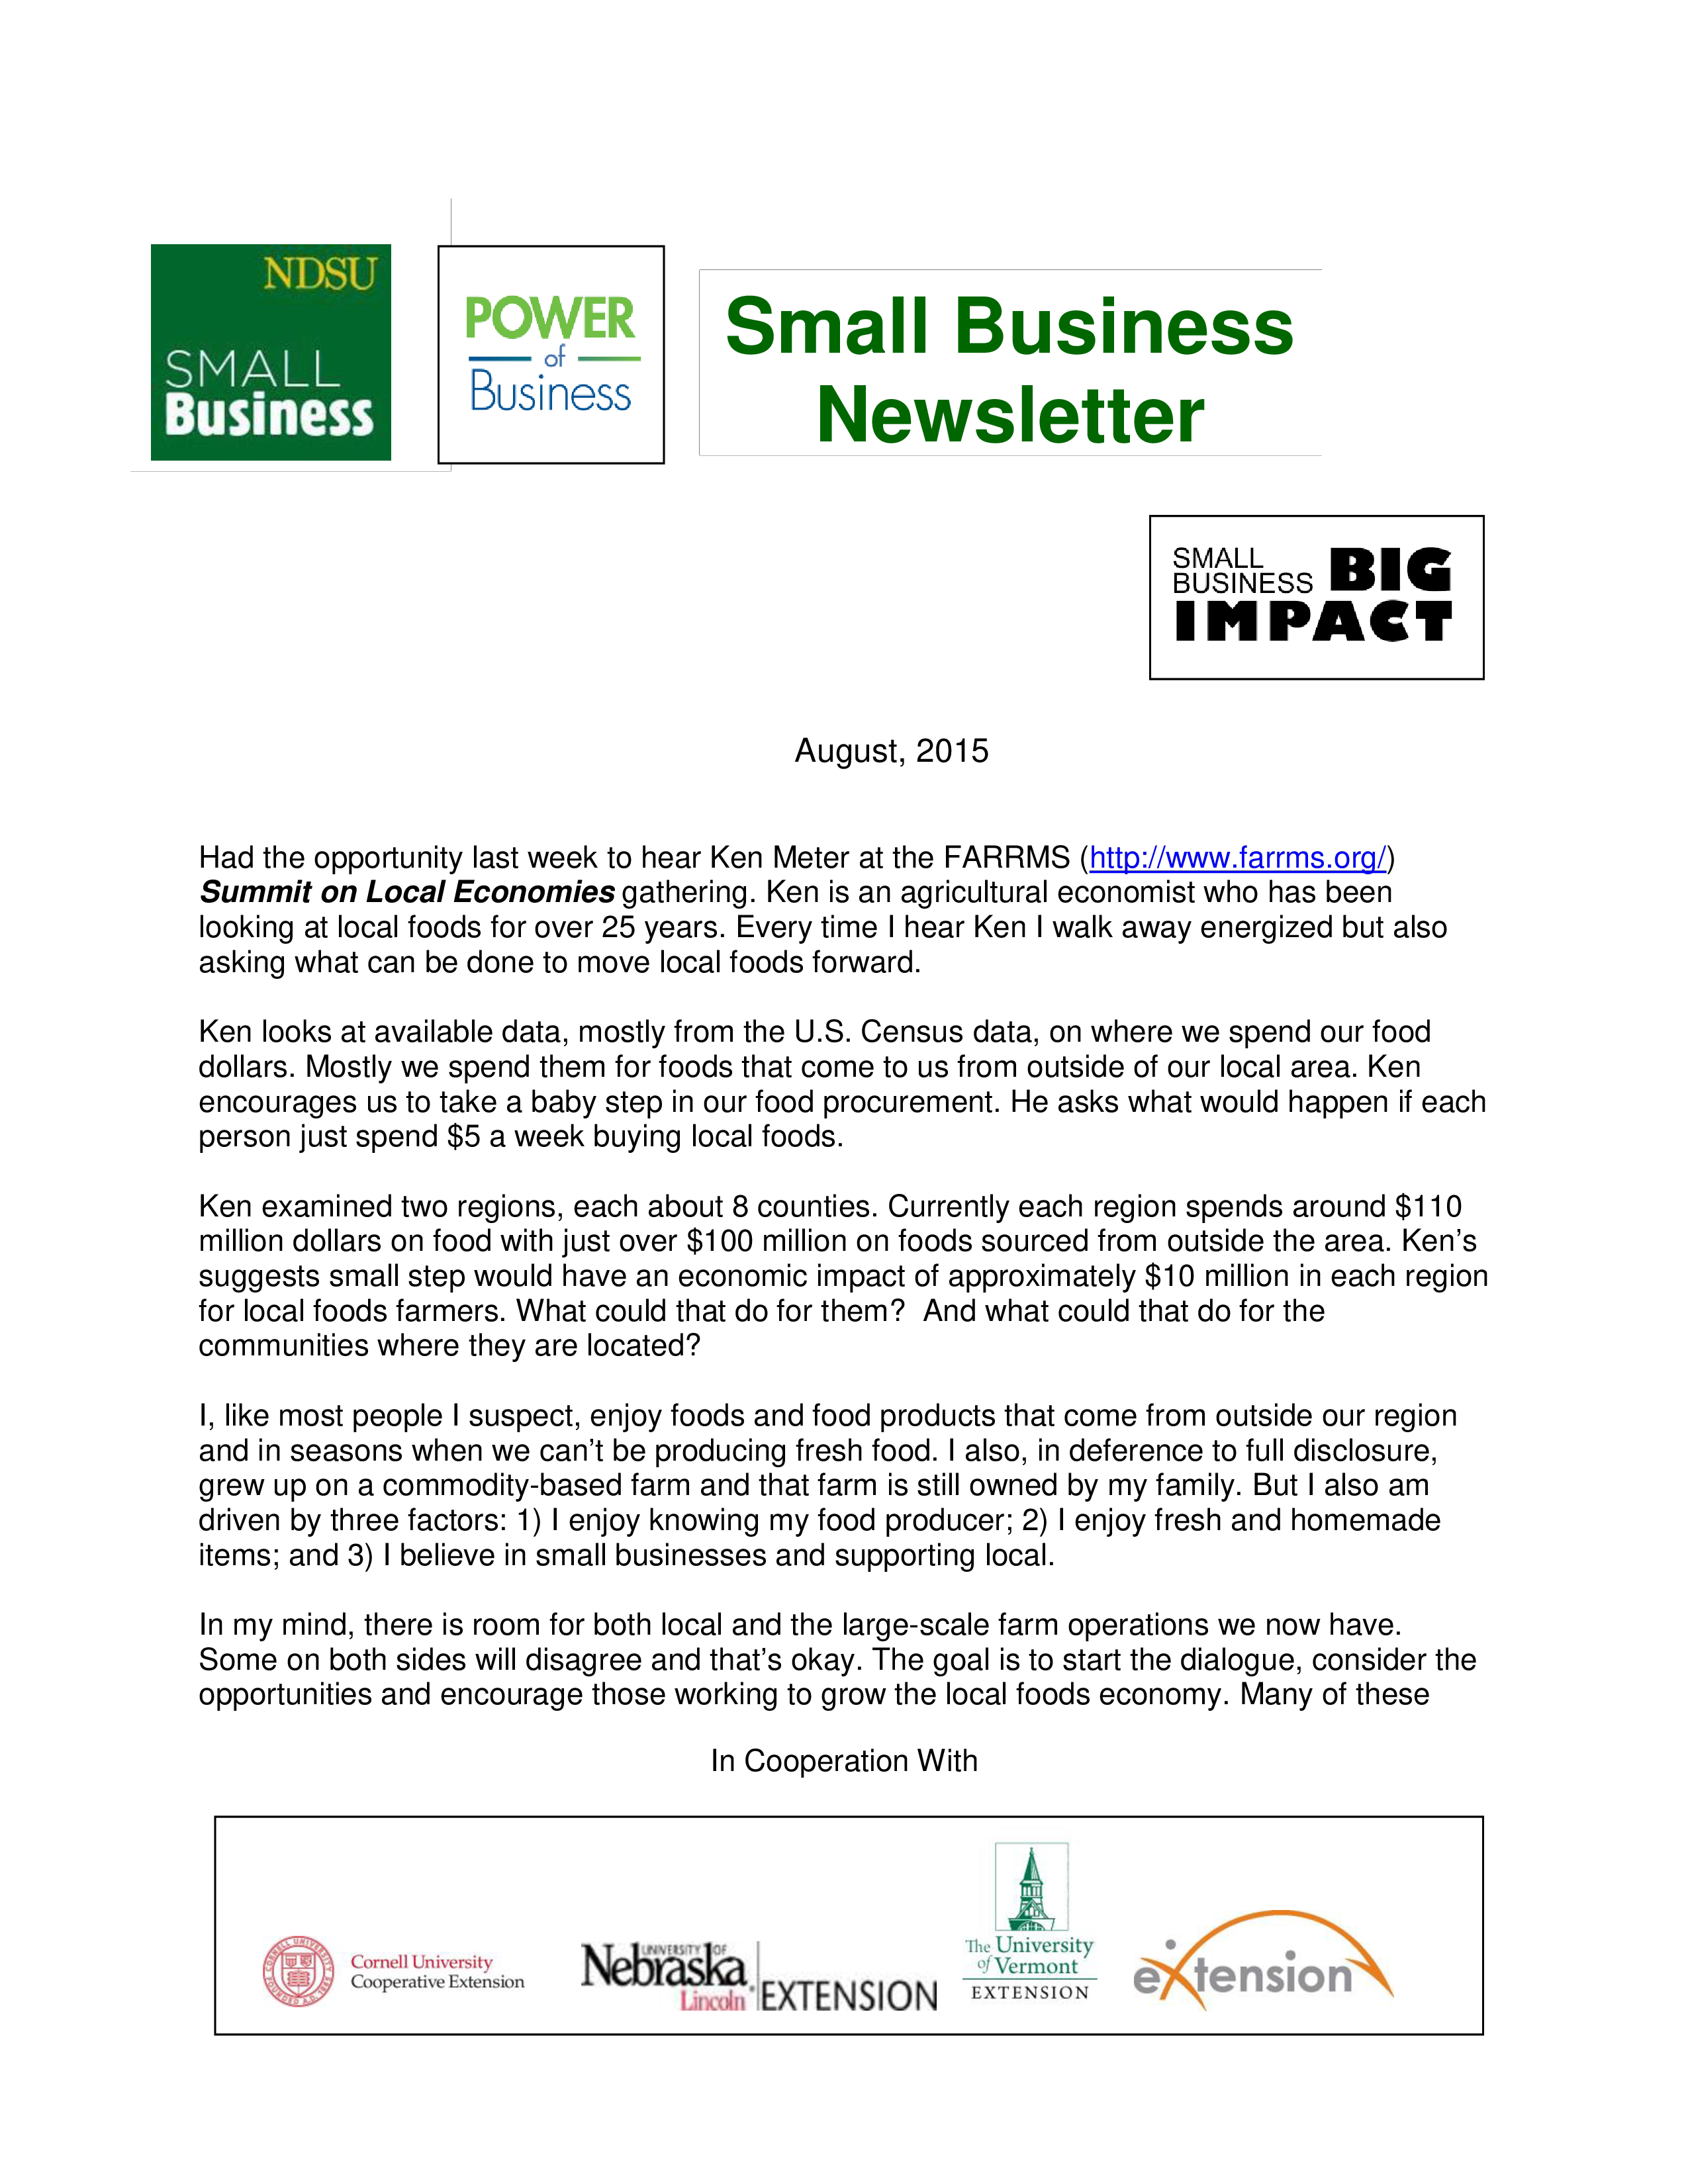 Small Business Newsletter main image